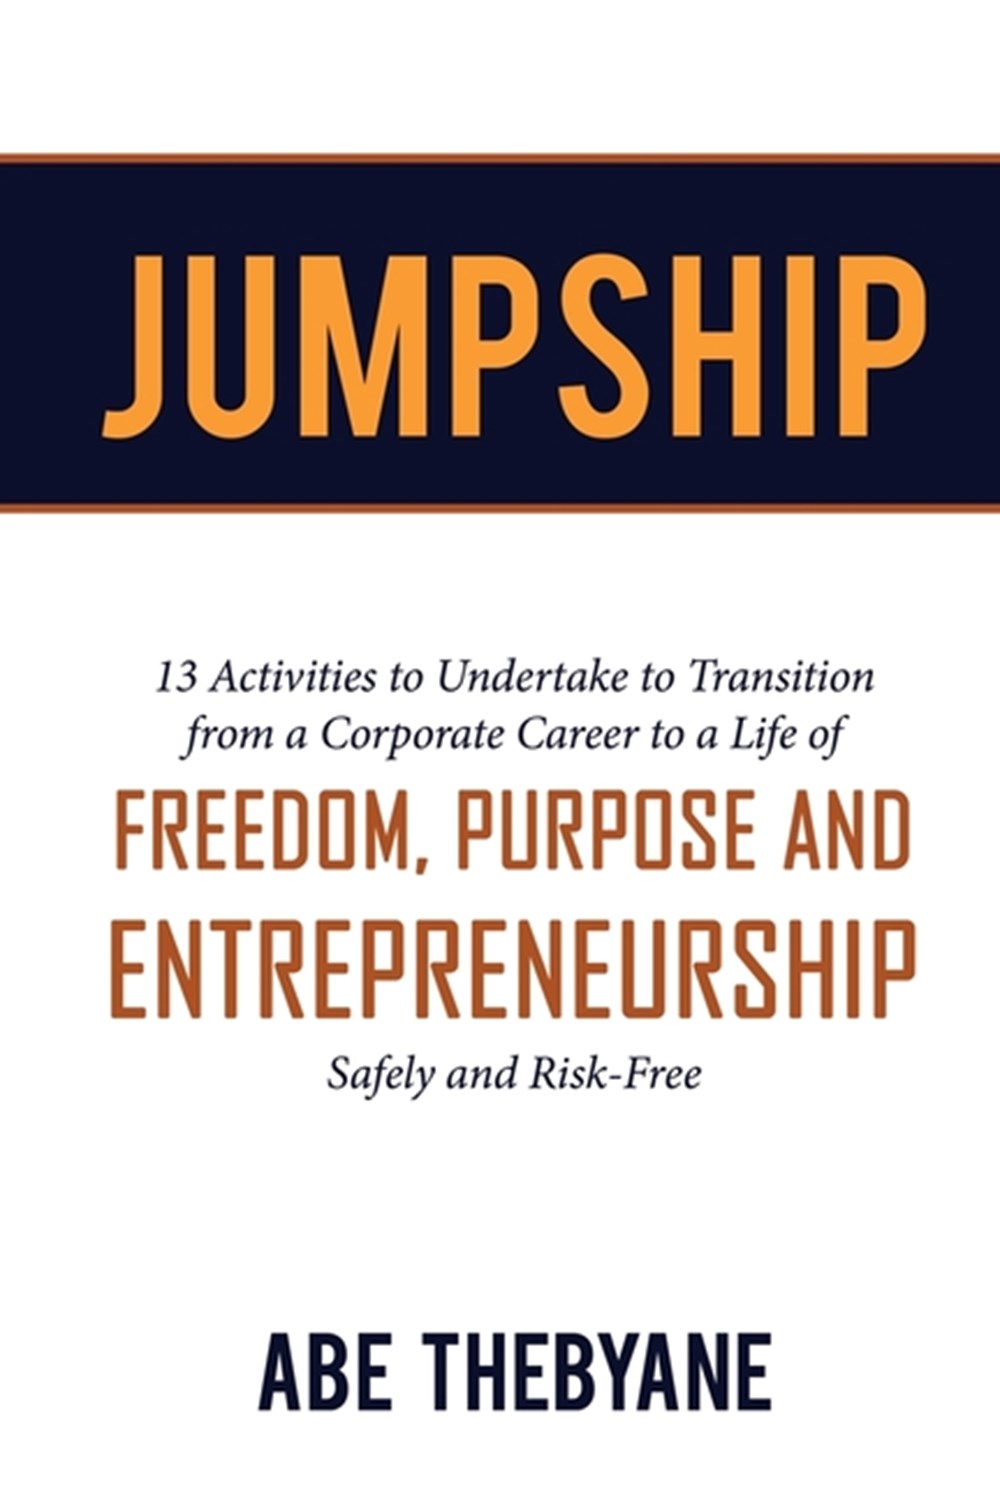 Jumpship: 13 Activities to Undertake to Transition from a Corporate Career to a Life of FREEDOM, PUR